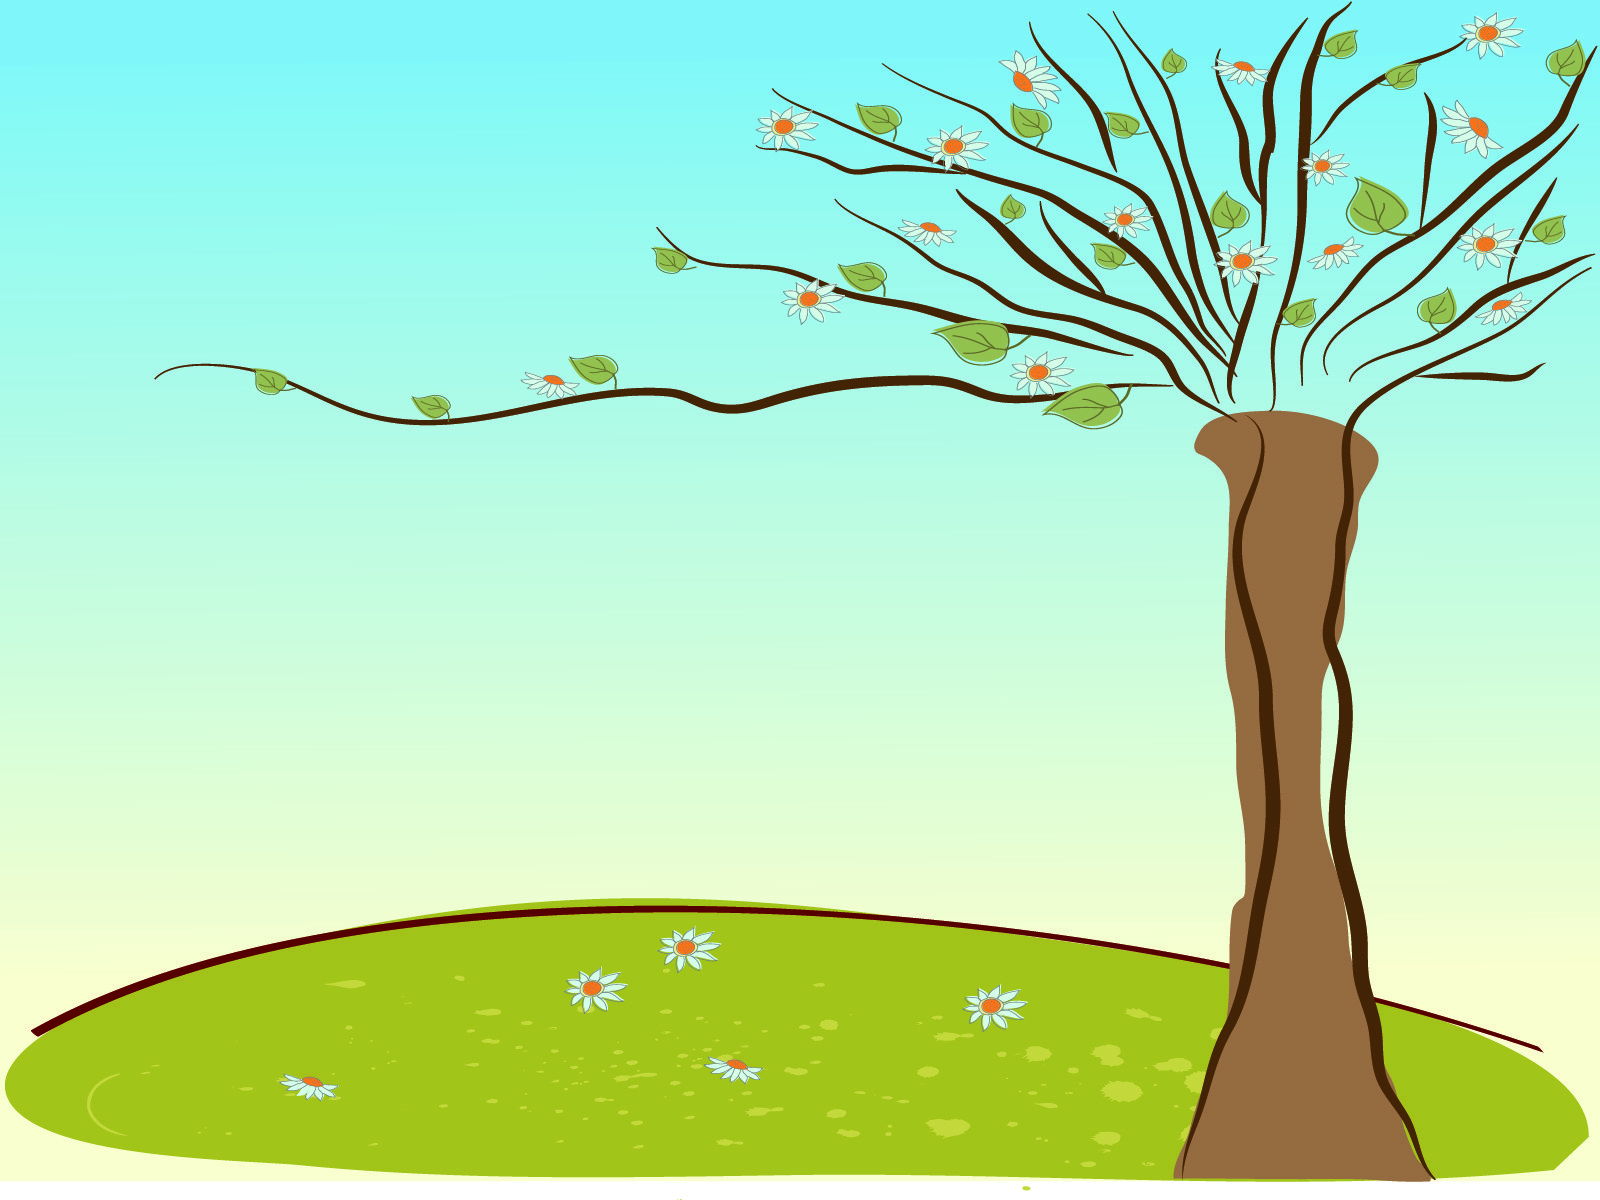 Wizened Tree PPT Backgrounds